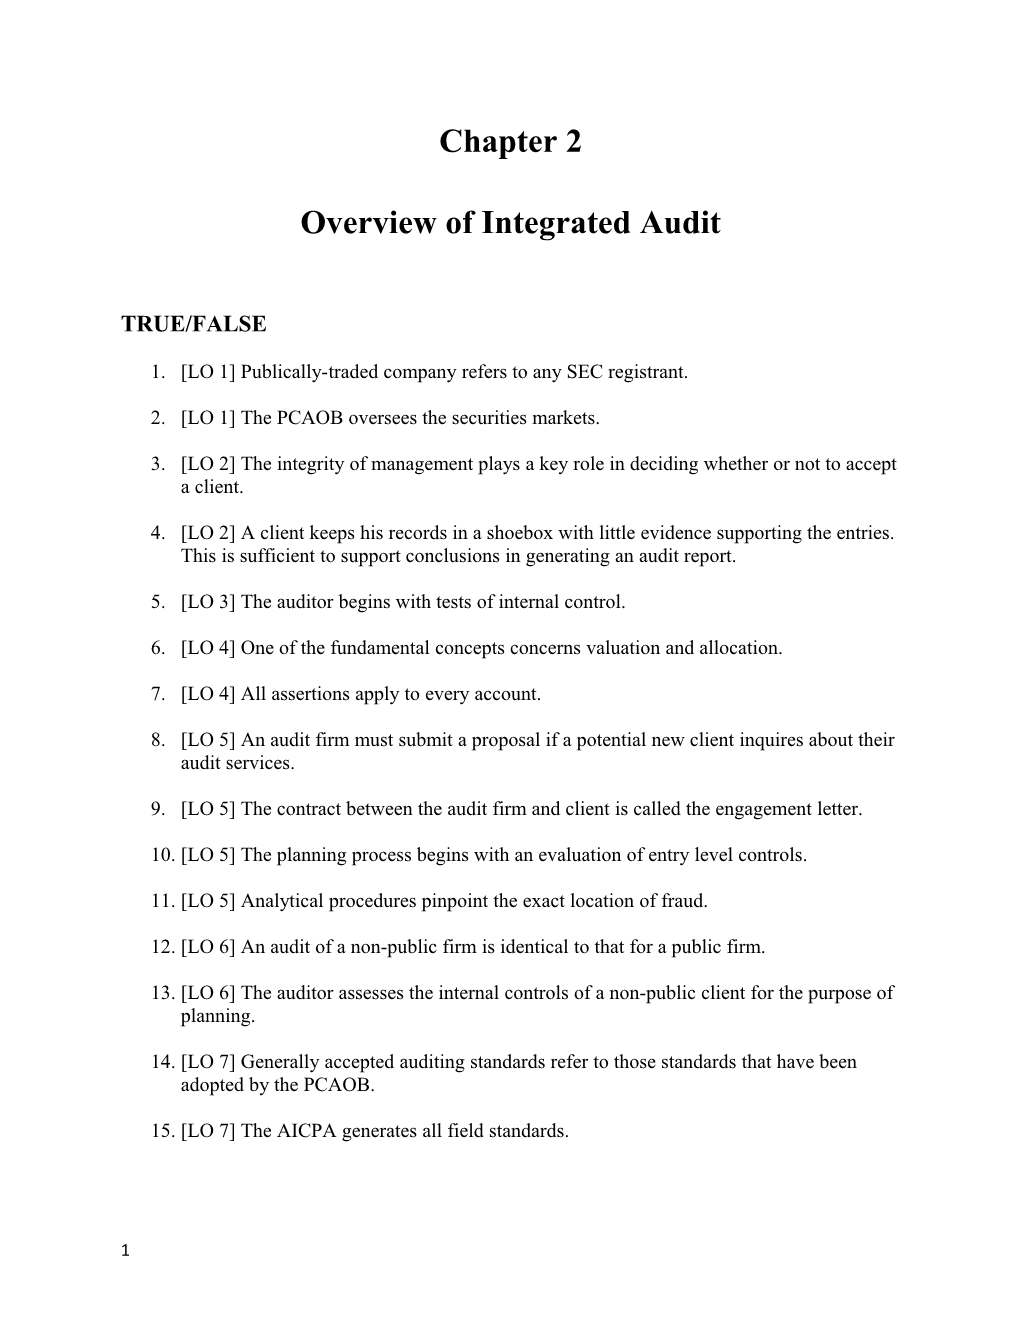 Overview of Integrated Audit